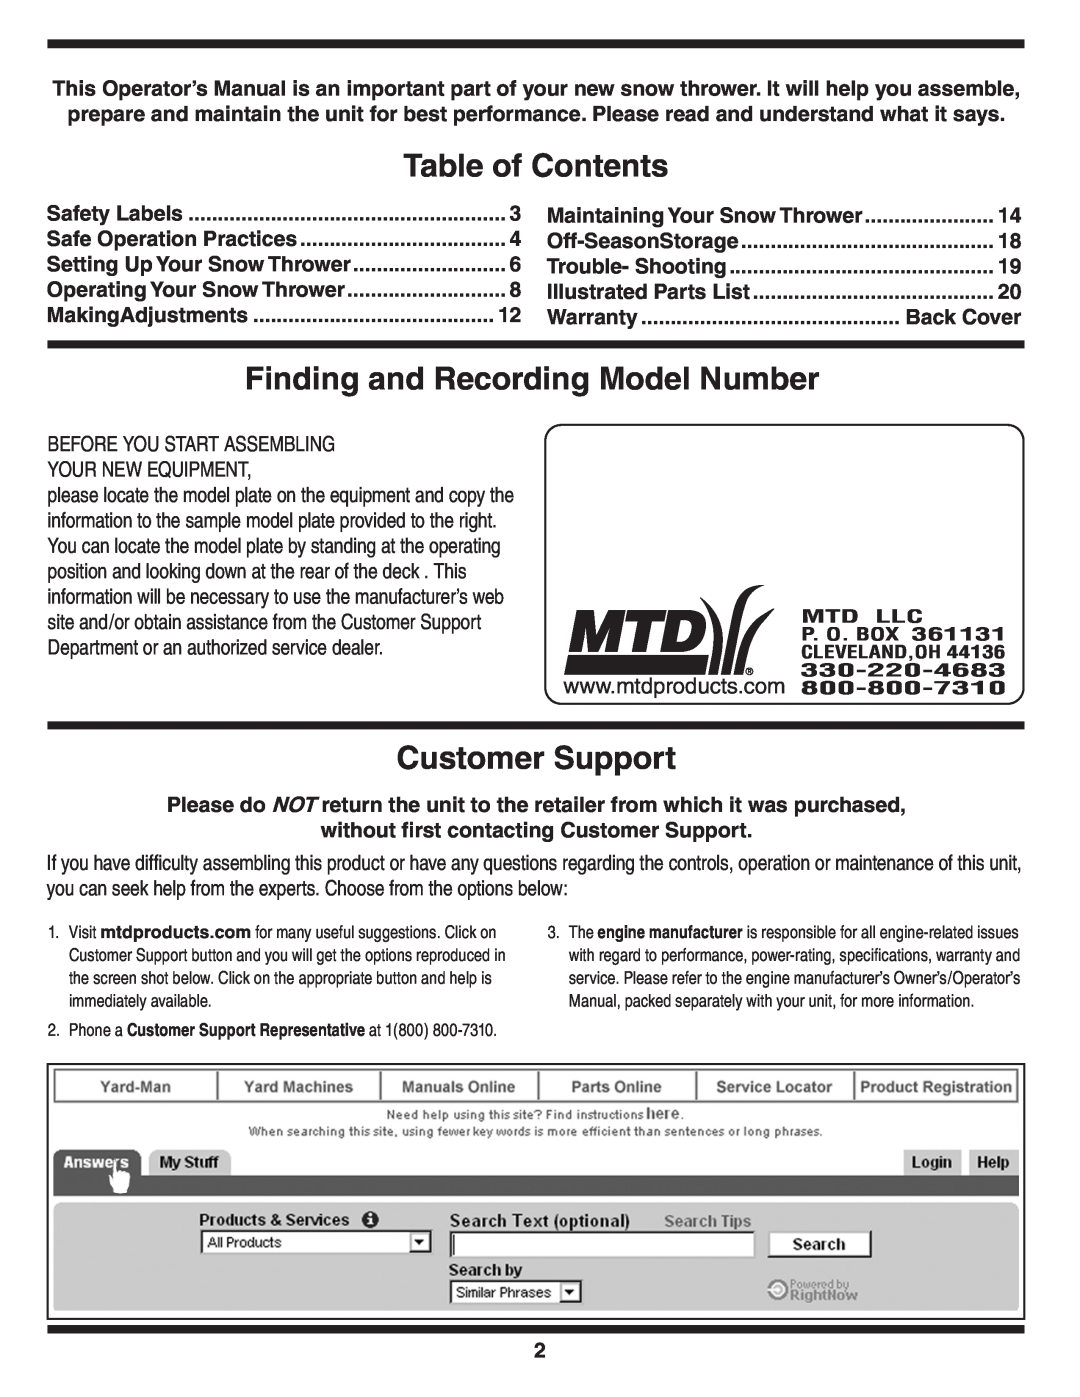 MTD 769-01275C Table of Contents, Finding and Recording Model Number, Customer Support, Maintaining Your Snow Thrower 